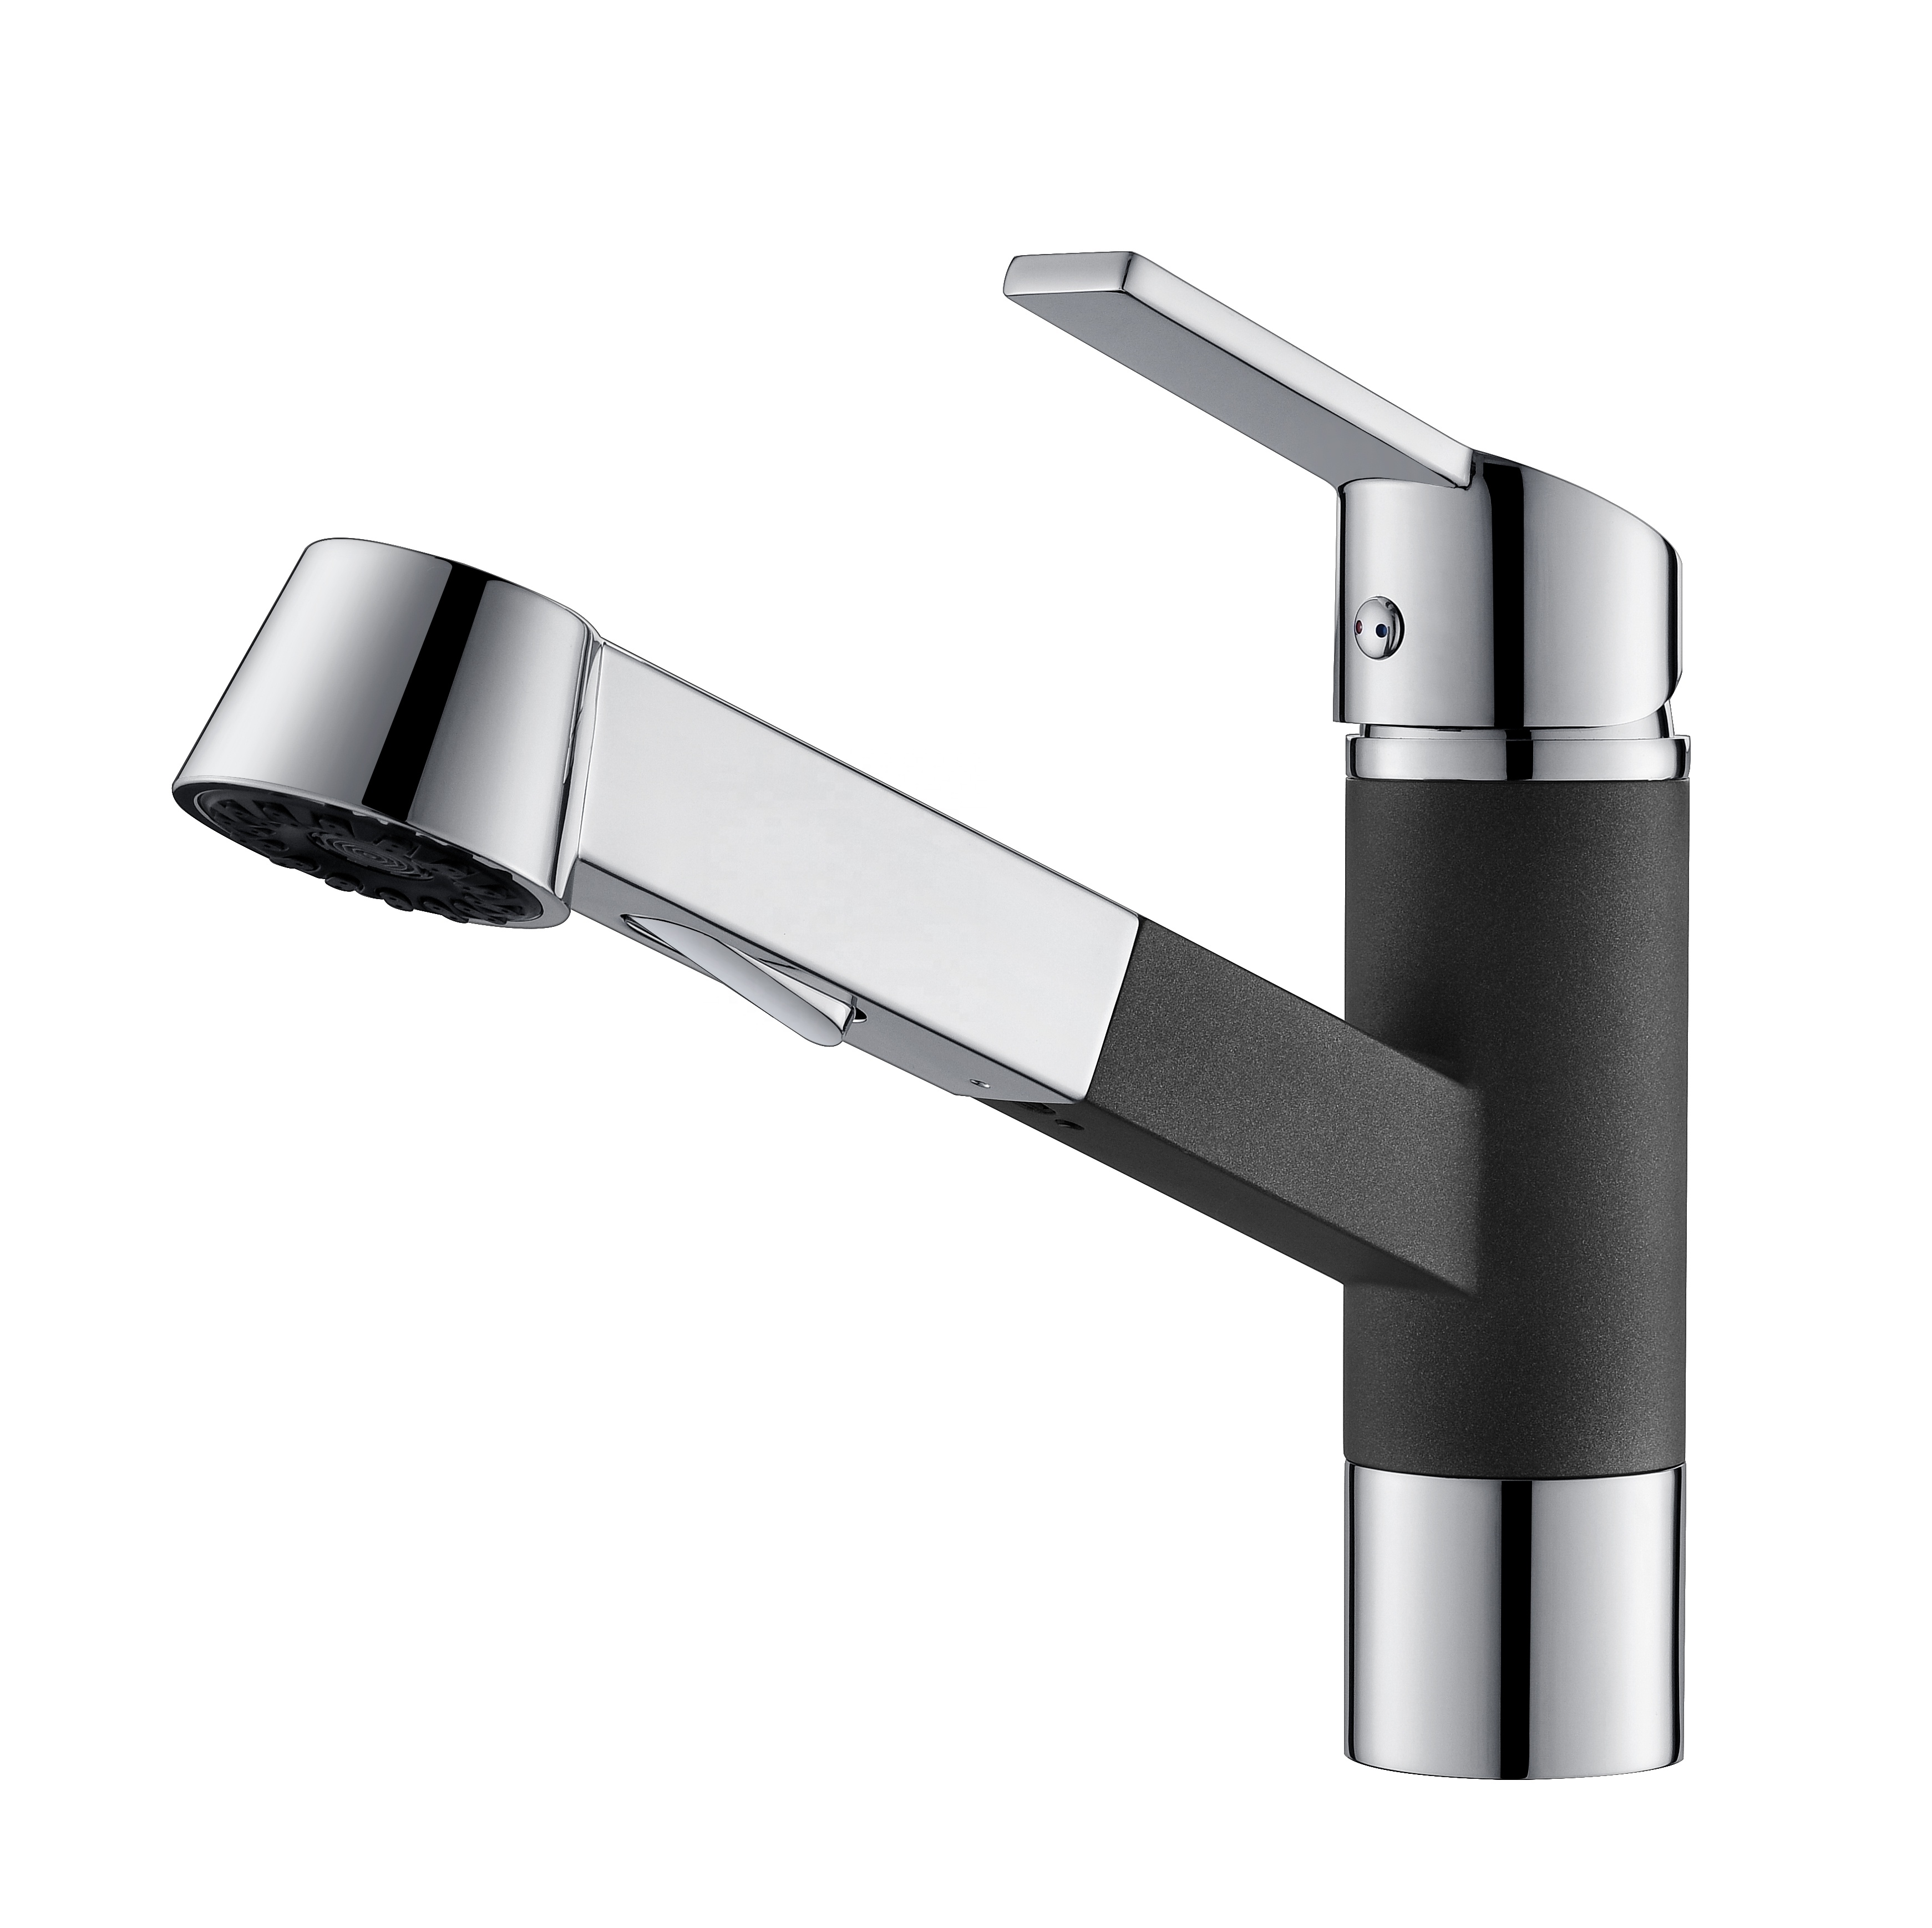 Kaiping Sanitary Faucet Or Sanitary Ware Or Kitchen Sink Faucet Zinc Handle Faucet Modern